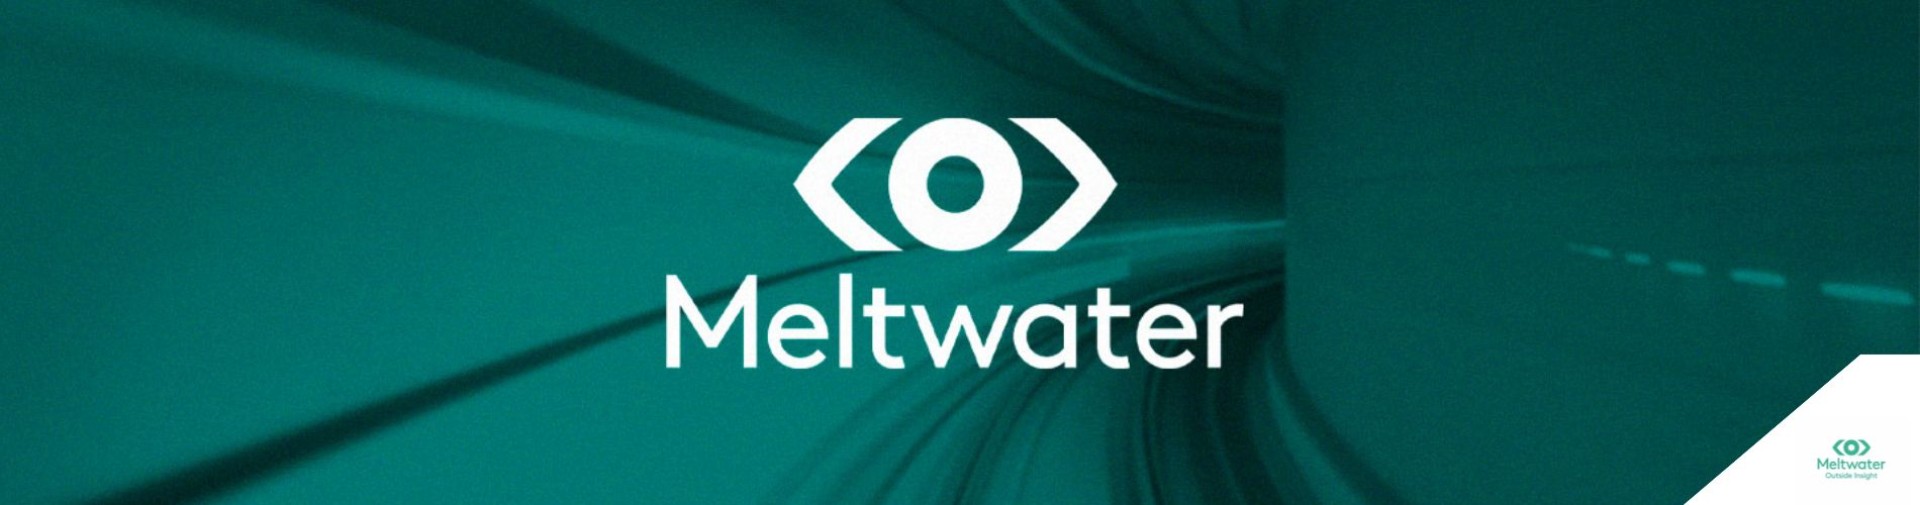 meltwater_banner